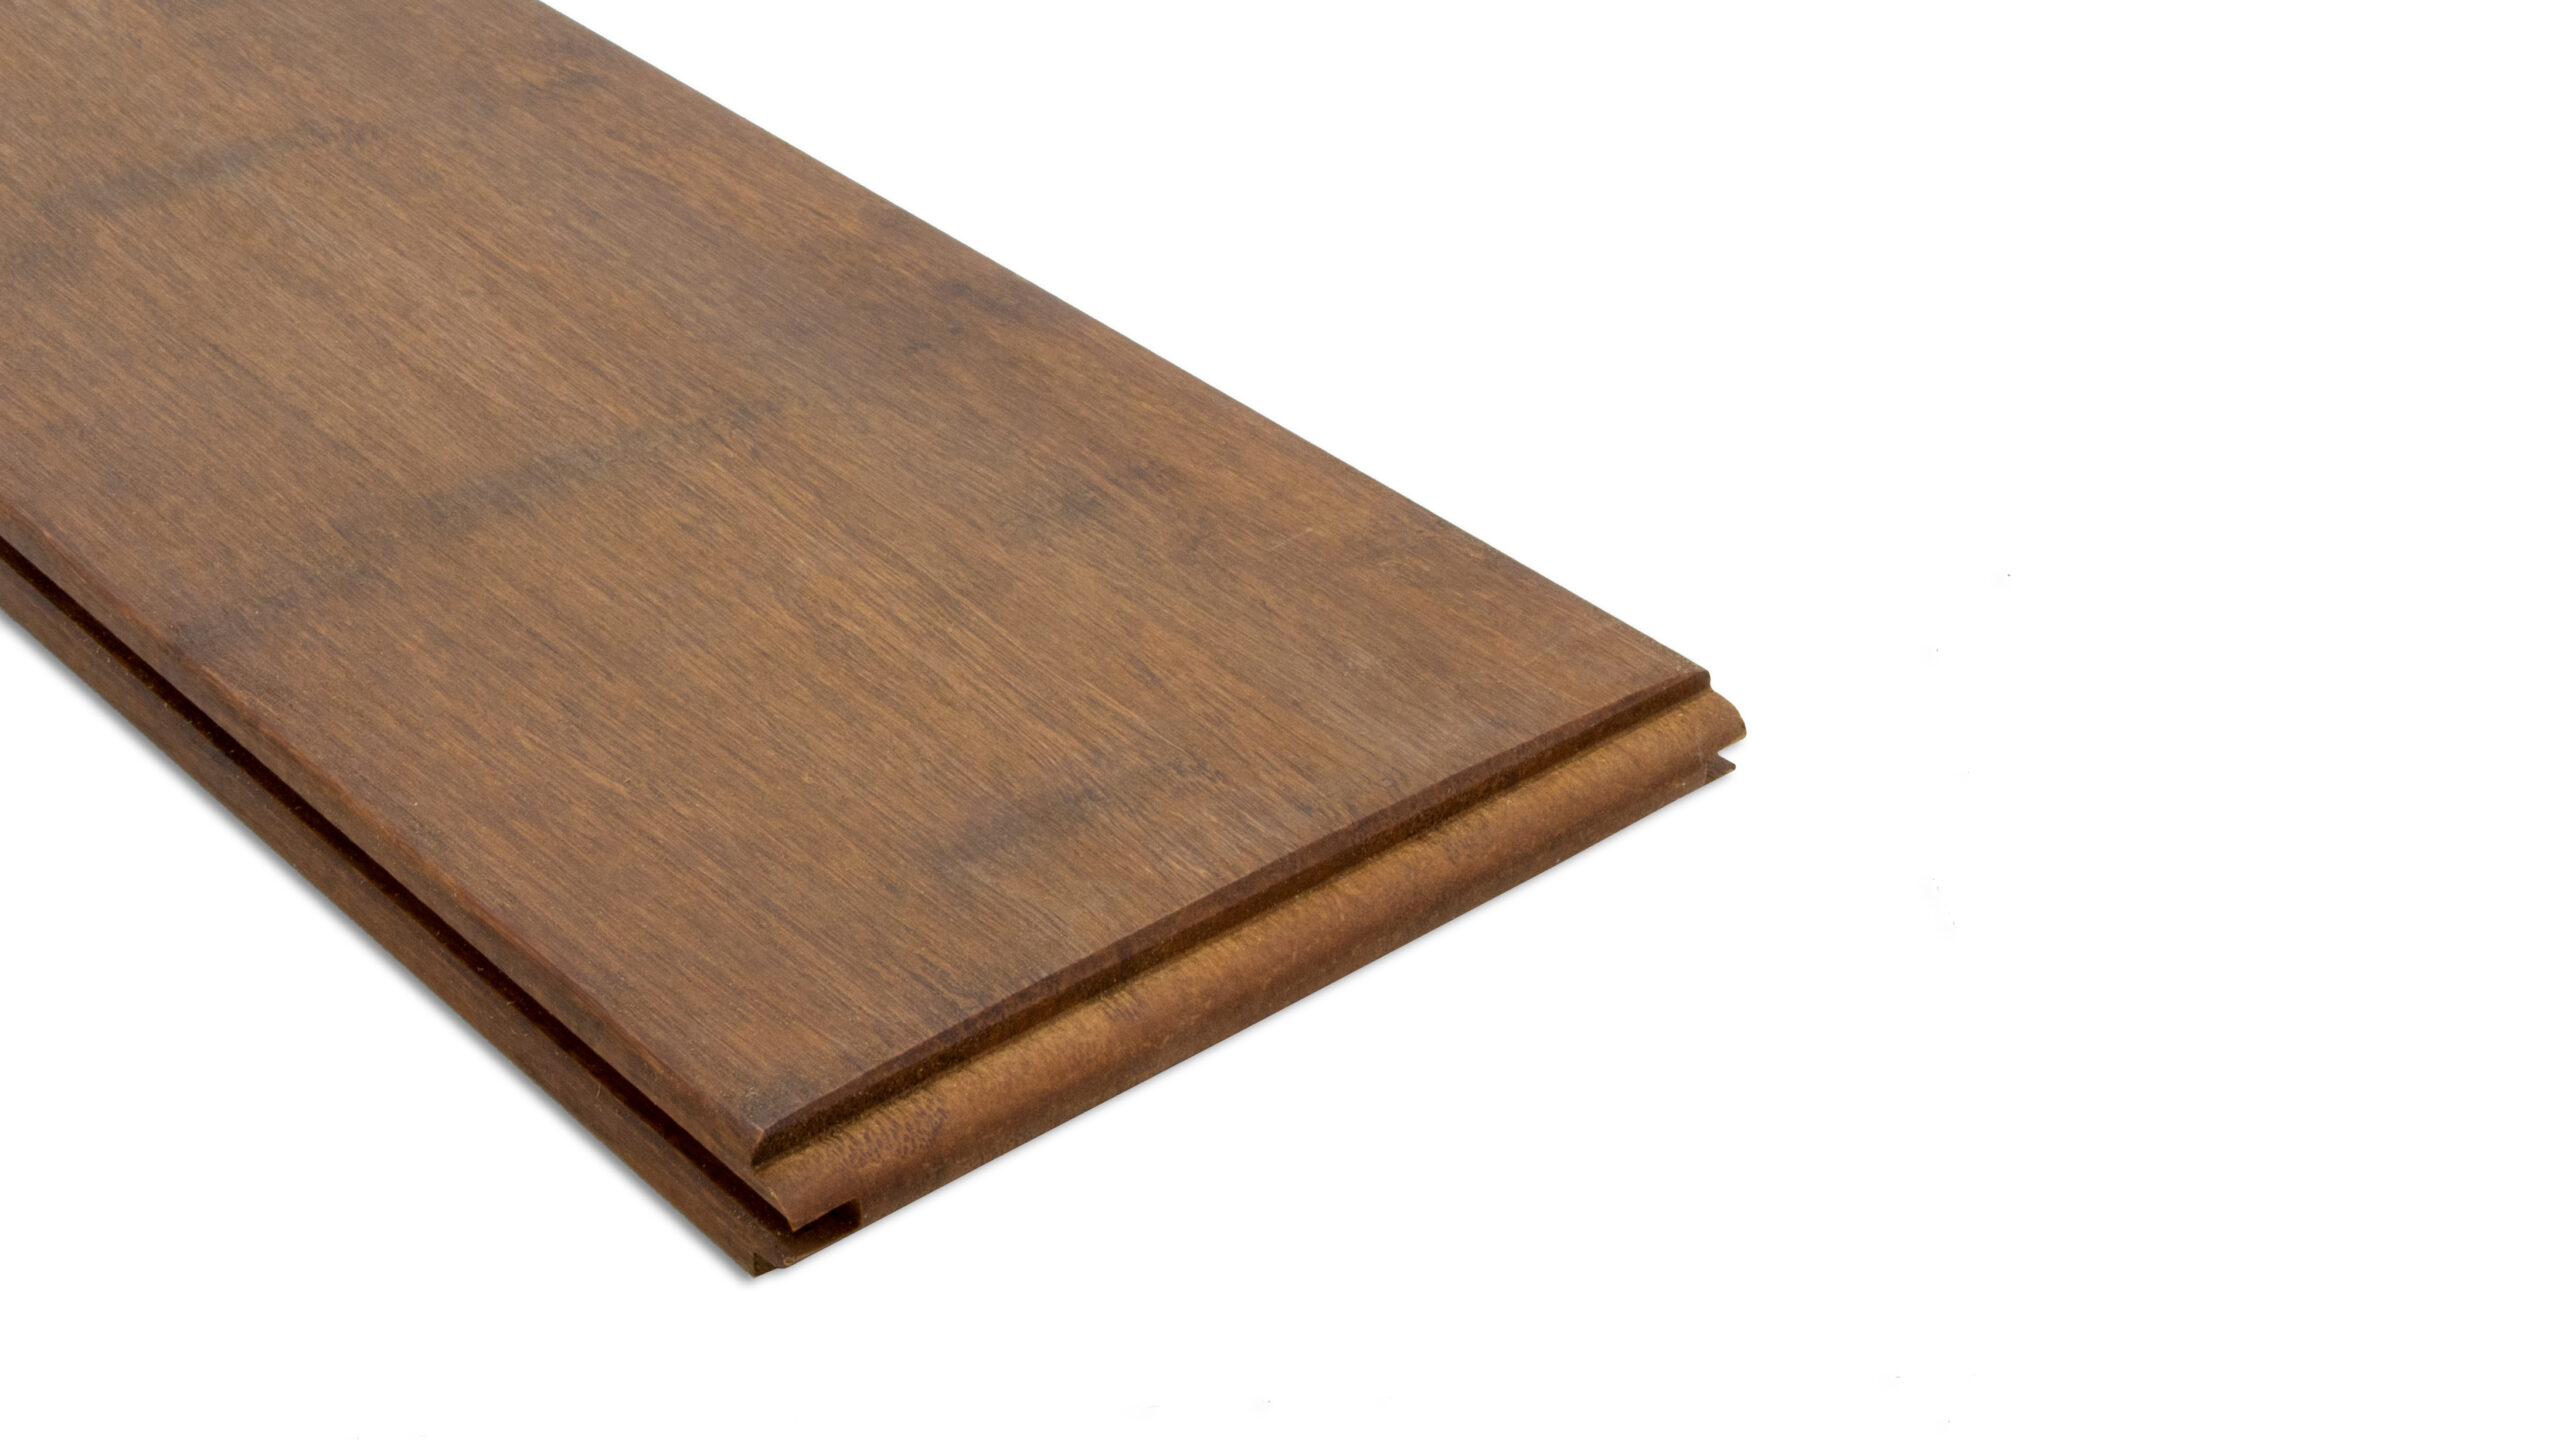 N-durance Bamboo Curved Deck Board